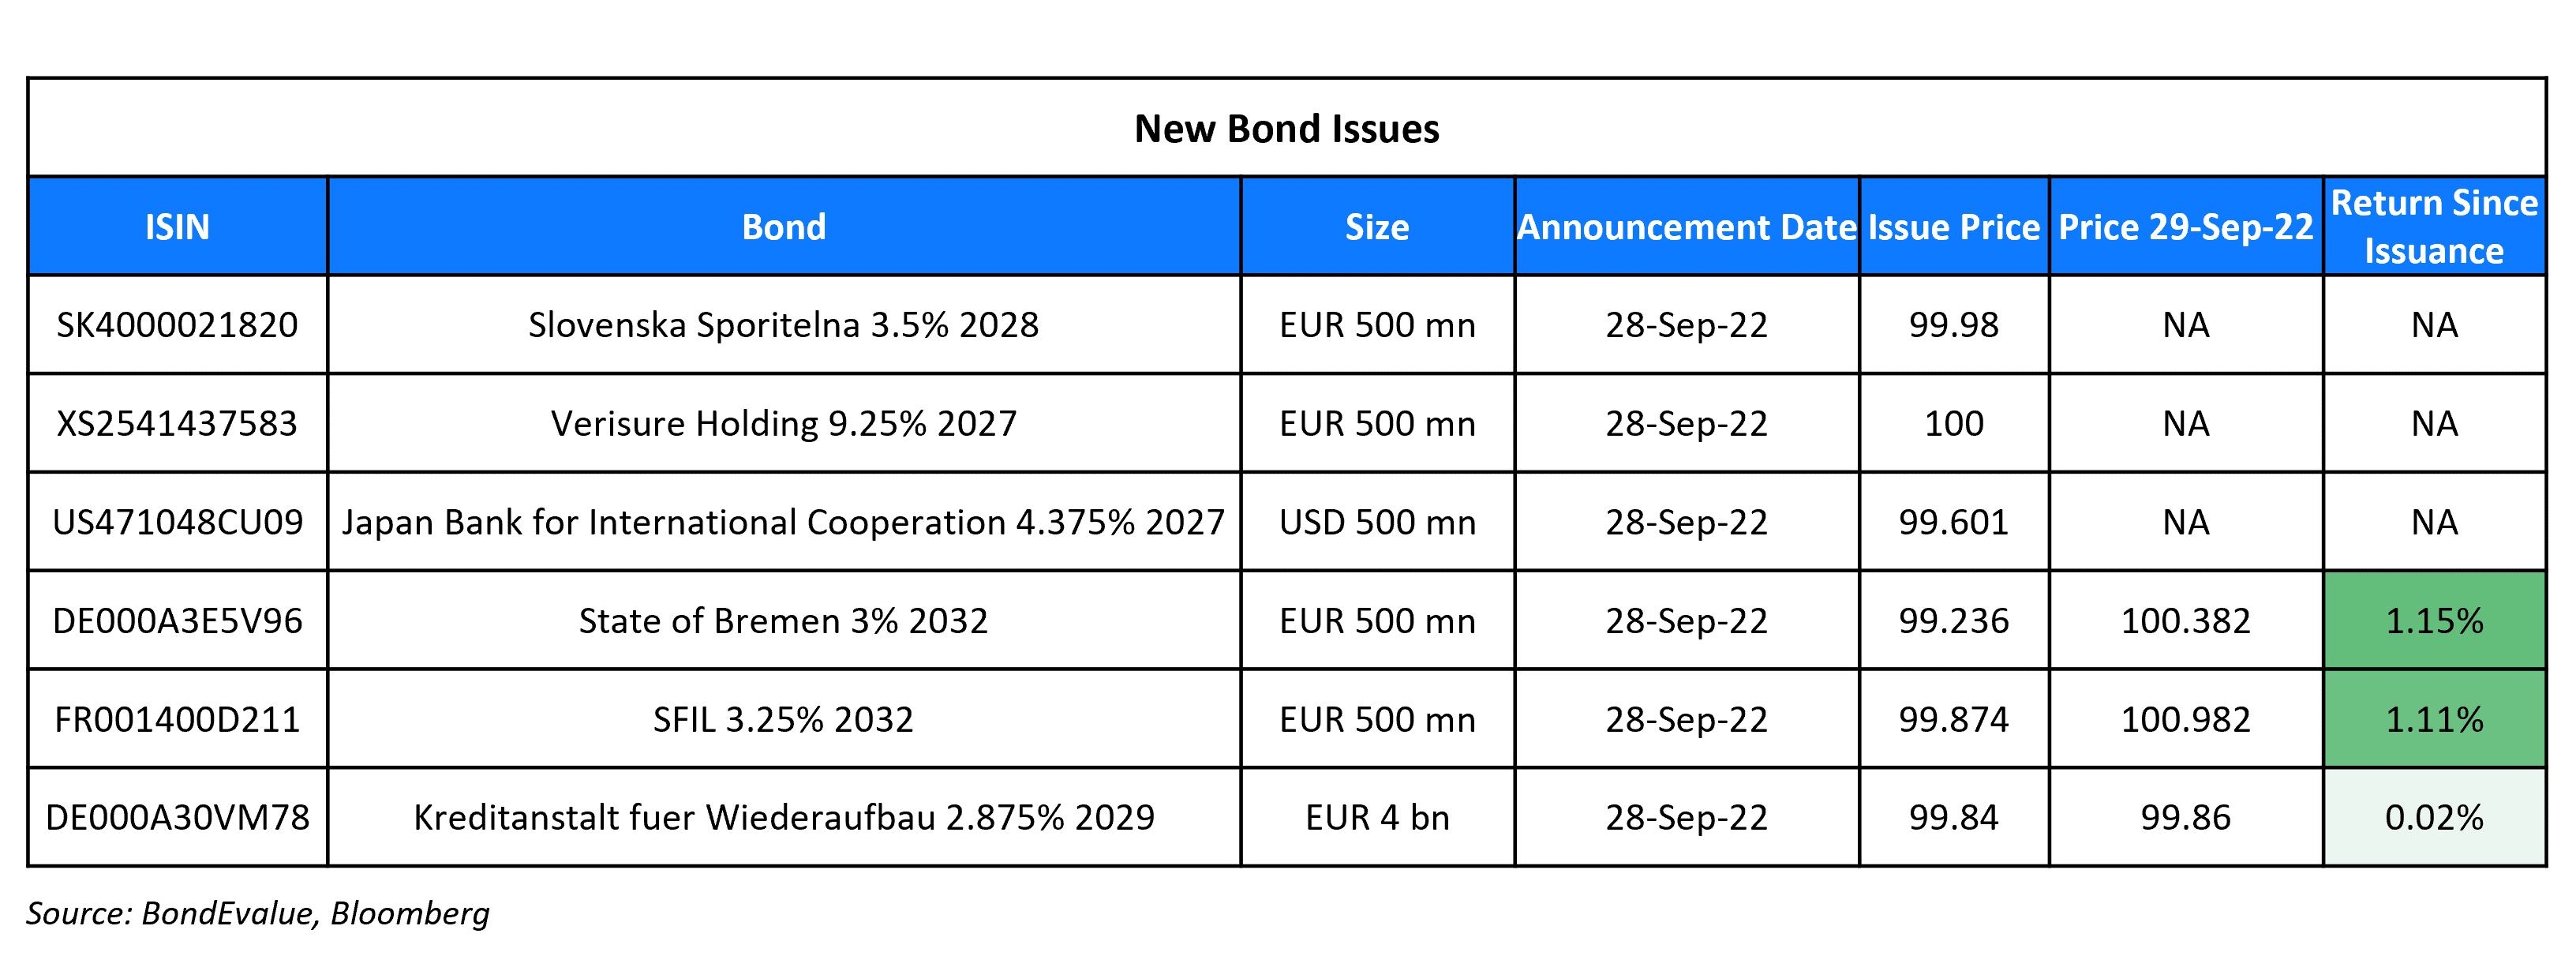 New Bond Issues 29 Sep 22